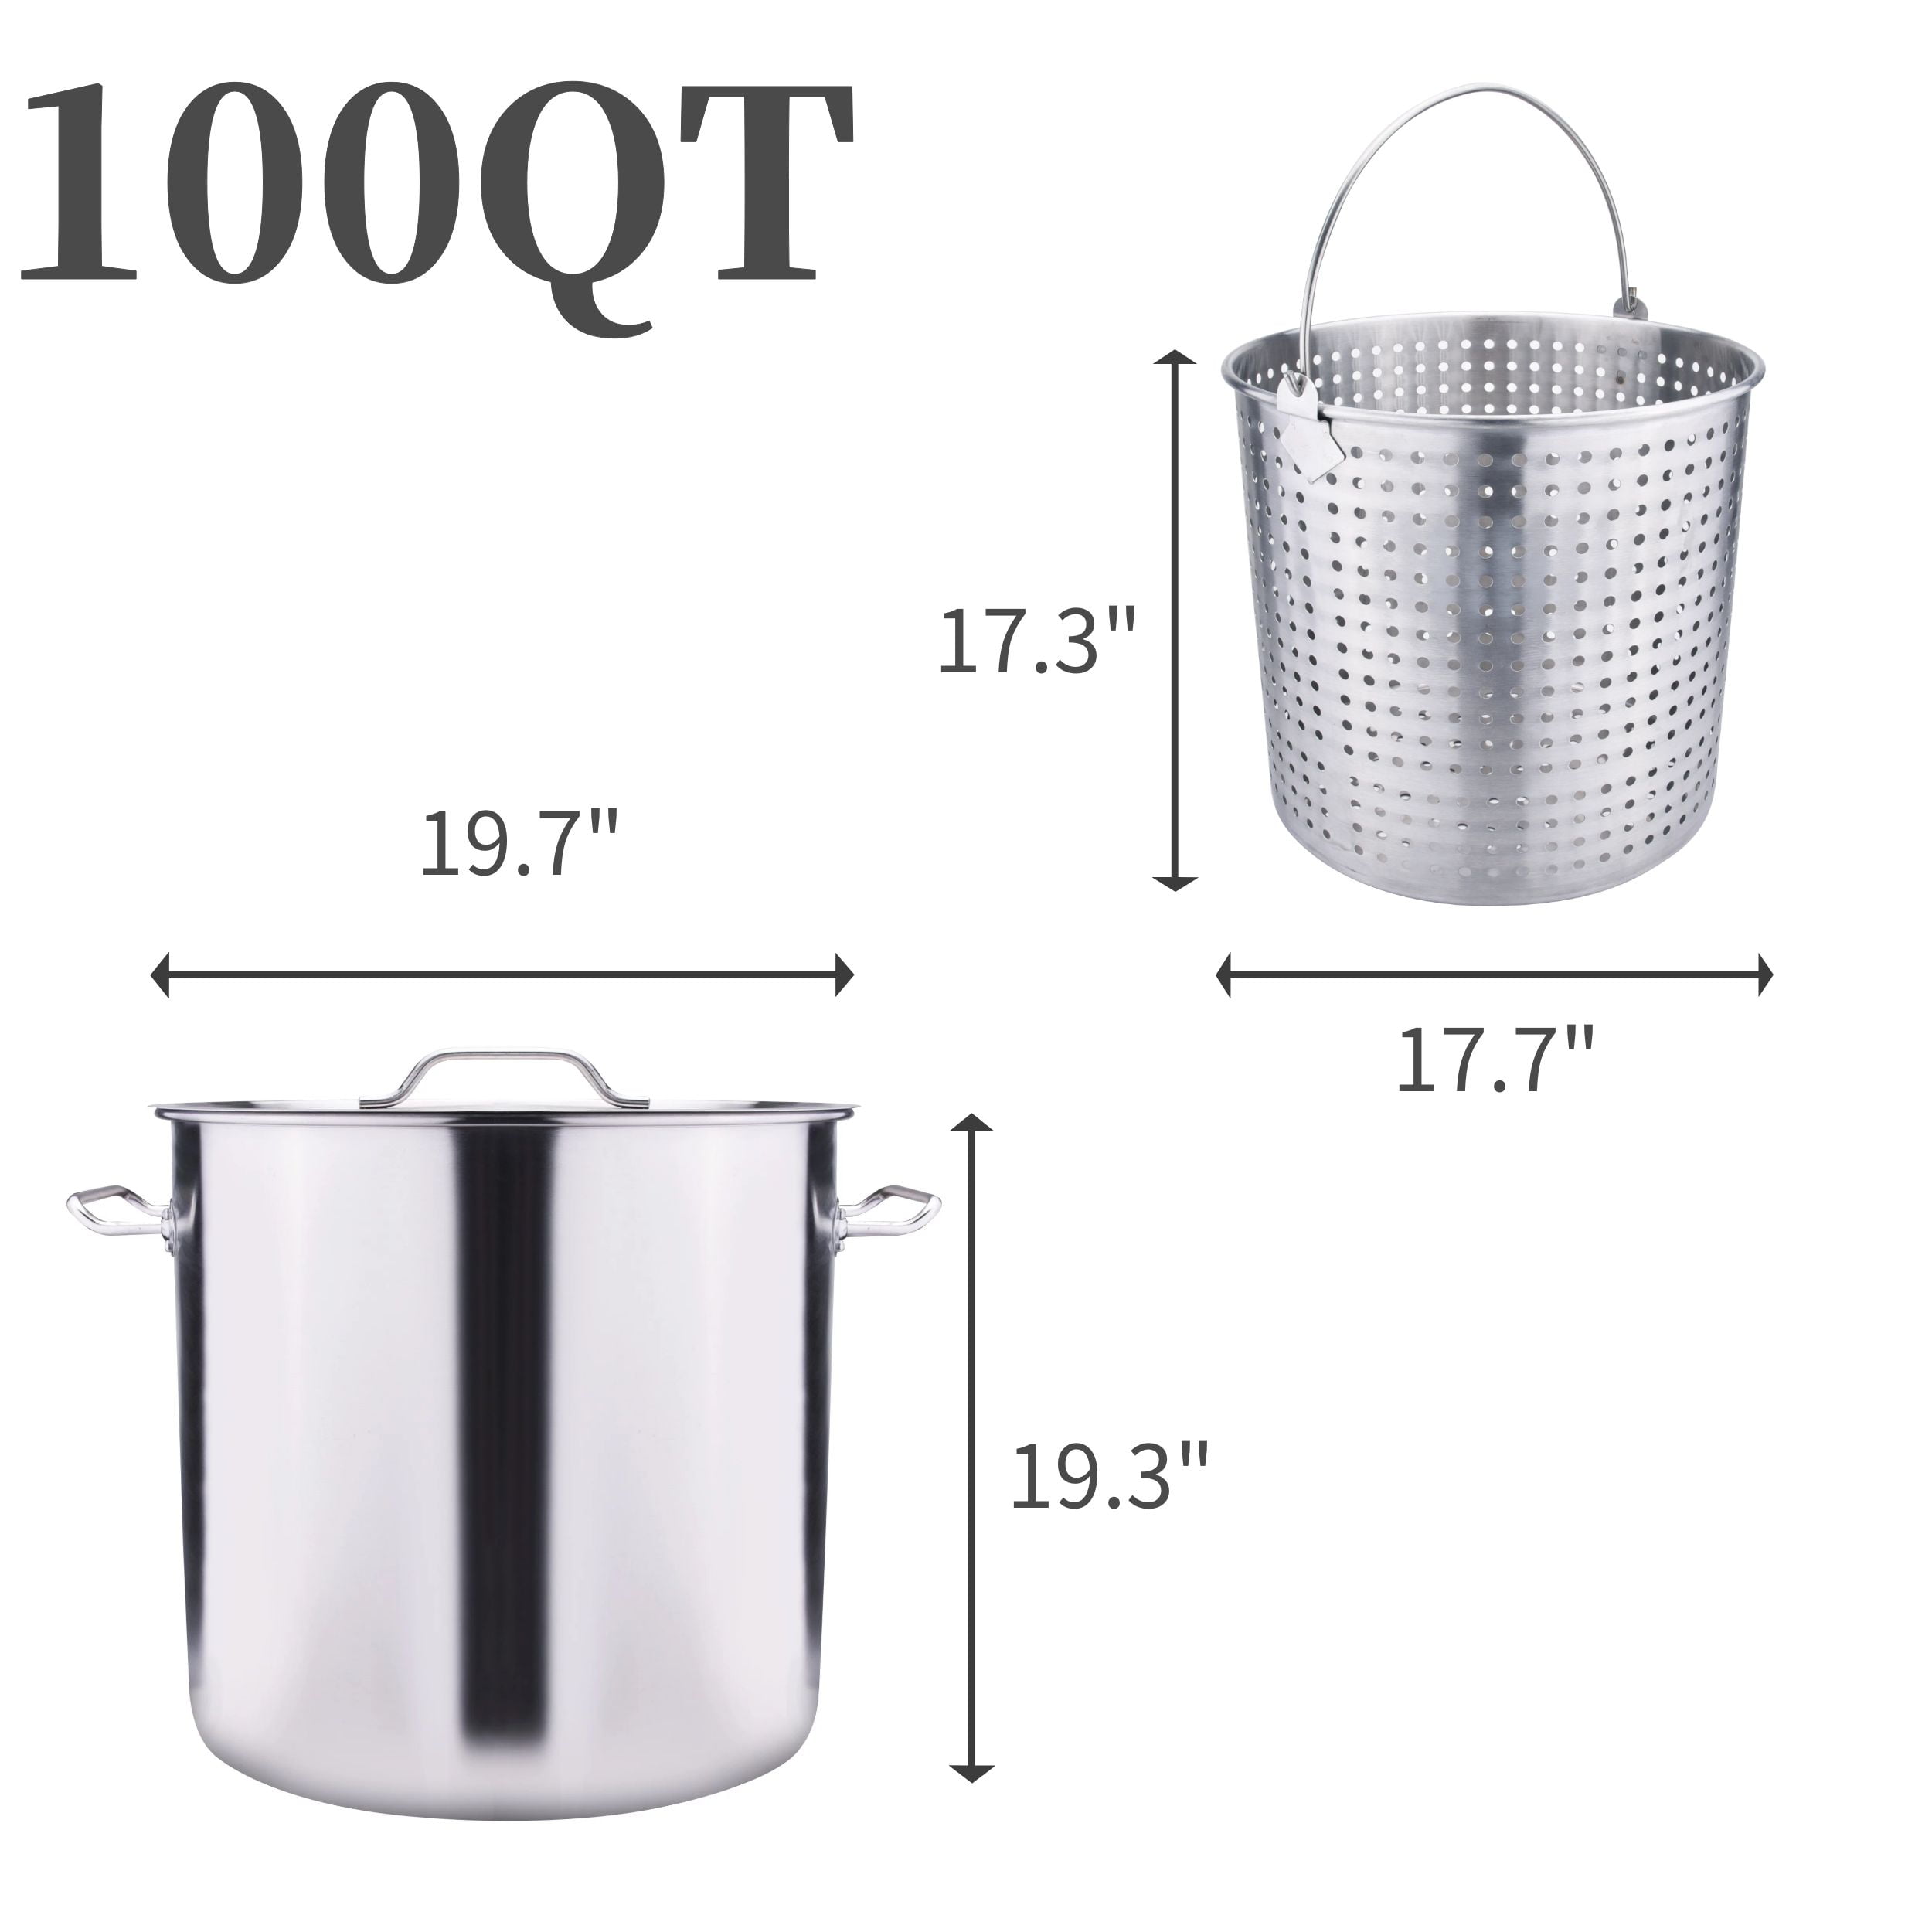 ARC 64-QT Large Stainless Steel Stockpot for Seafood Boiler Crawfish Pot  w/Basket and Steamer Rack, Outdoor Cooking Pot for Crab Lobster Shrimp